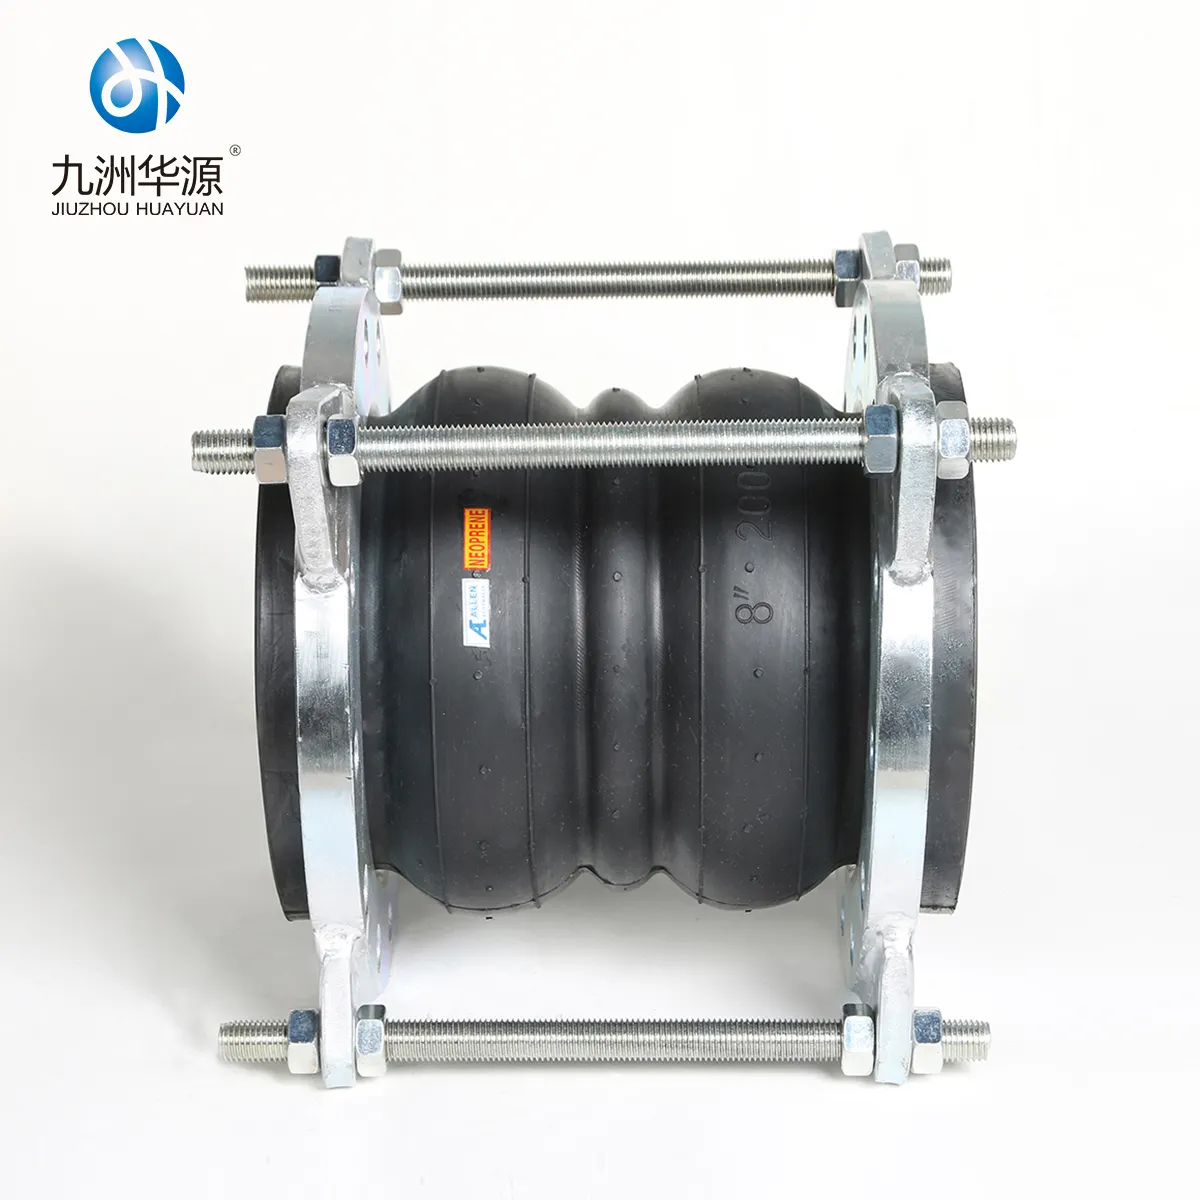 HuaYuan Brand Double Sphere Flexible Rubber Joint Rubber Bellows Expansion Joint Limit Rod Joint Made In China